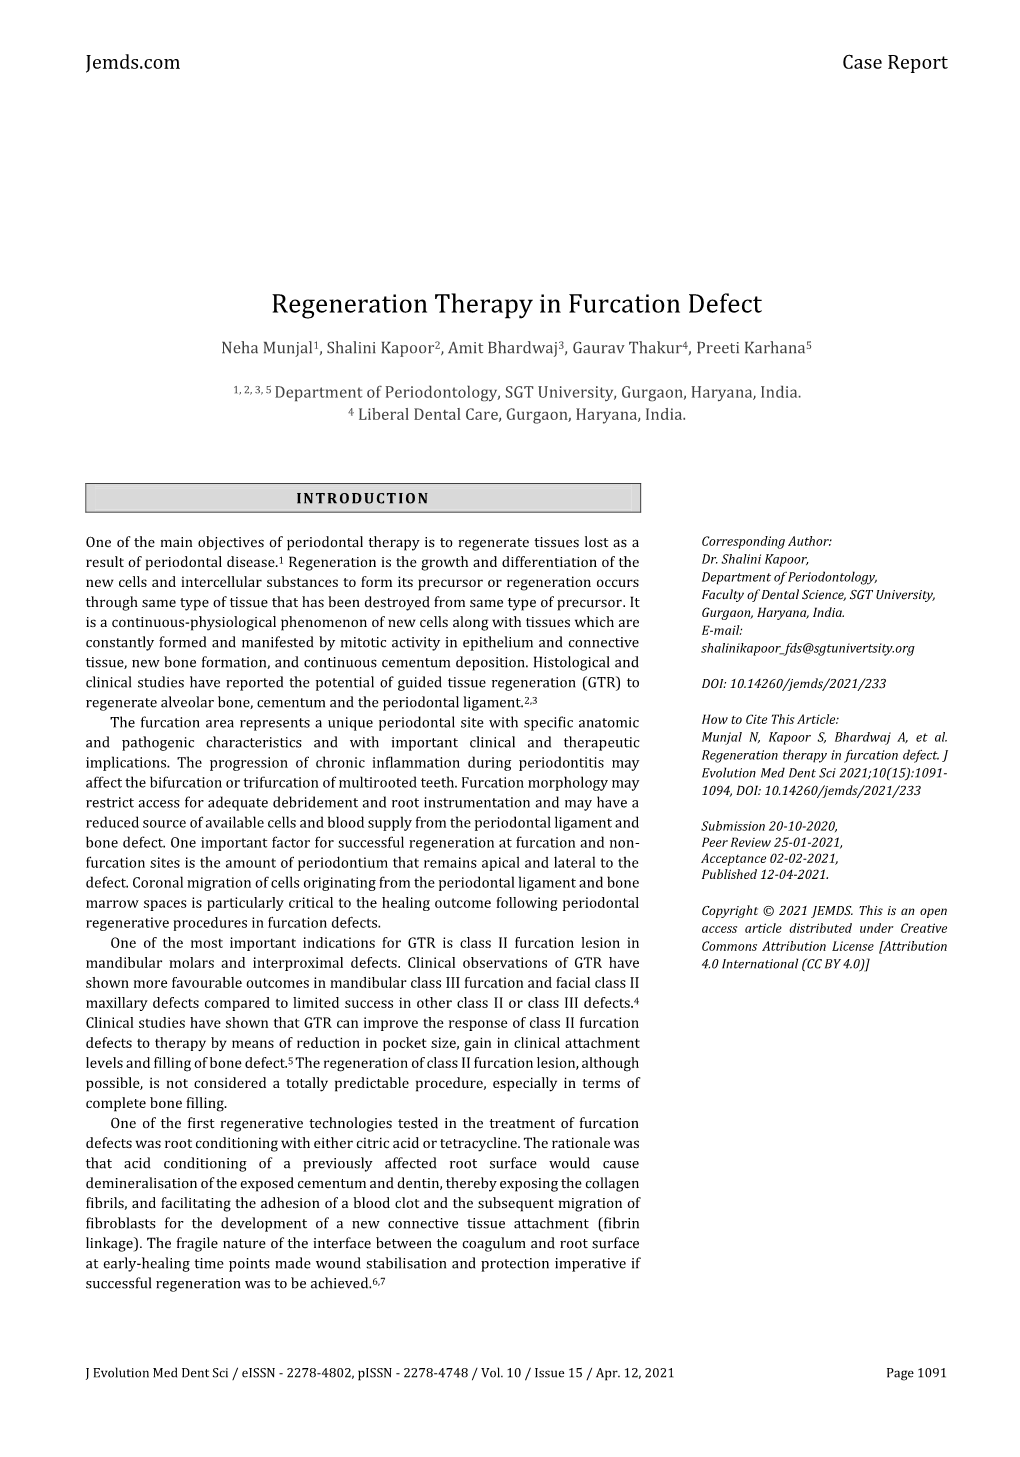 Regeneration Therapy in Furcation Defect